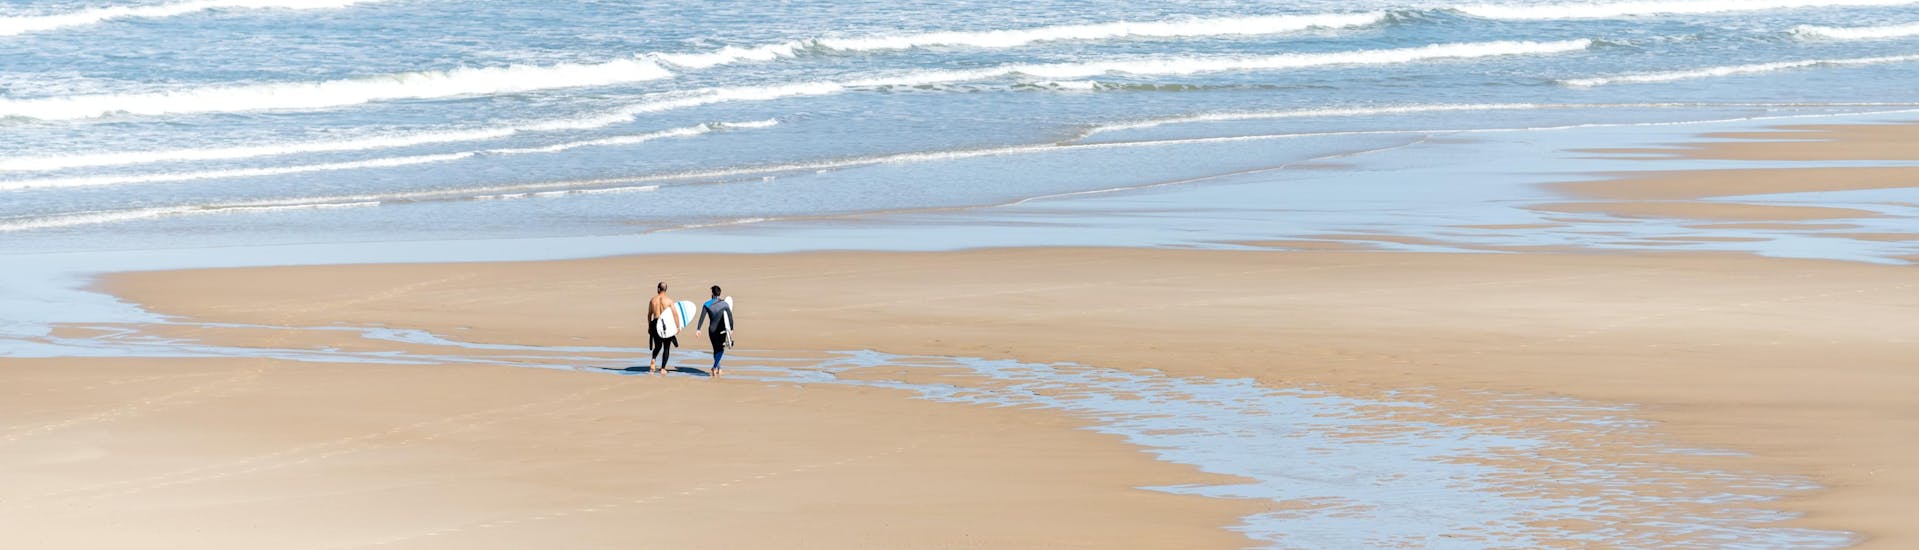 Two surfers are walking along the beach in their watesuits as they get ready to go surfing in Gironde.